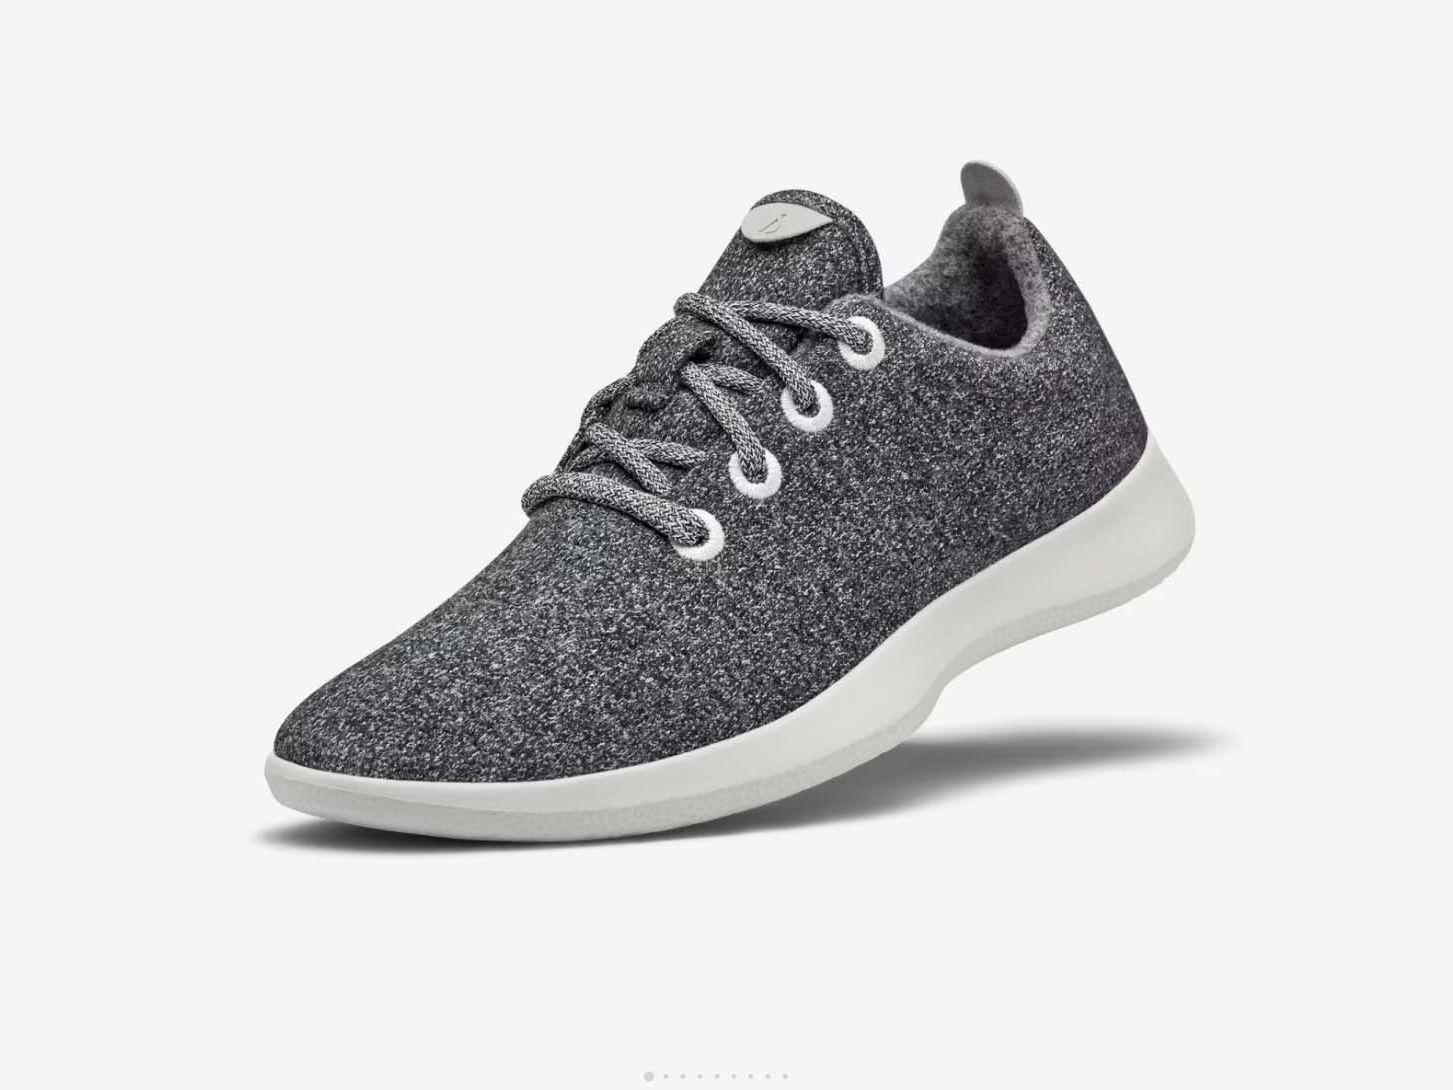 Are Allbirds Shoes Good for Walking?